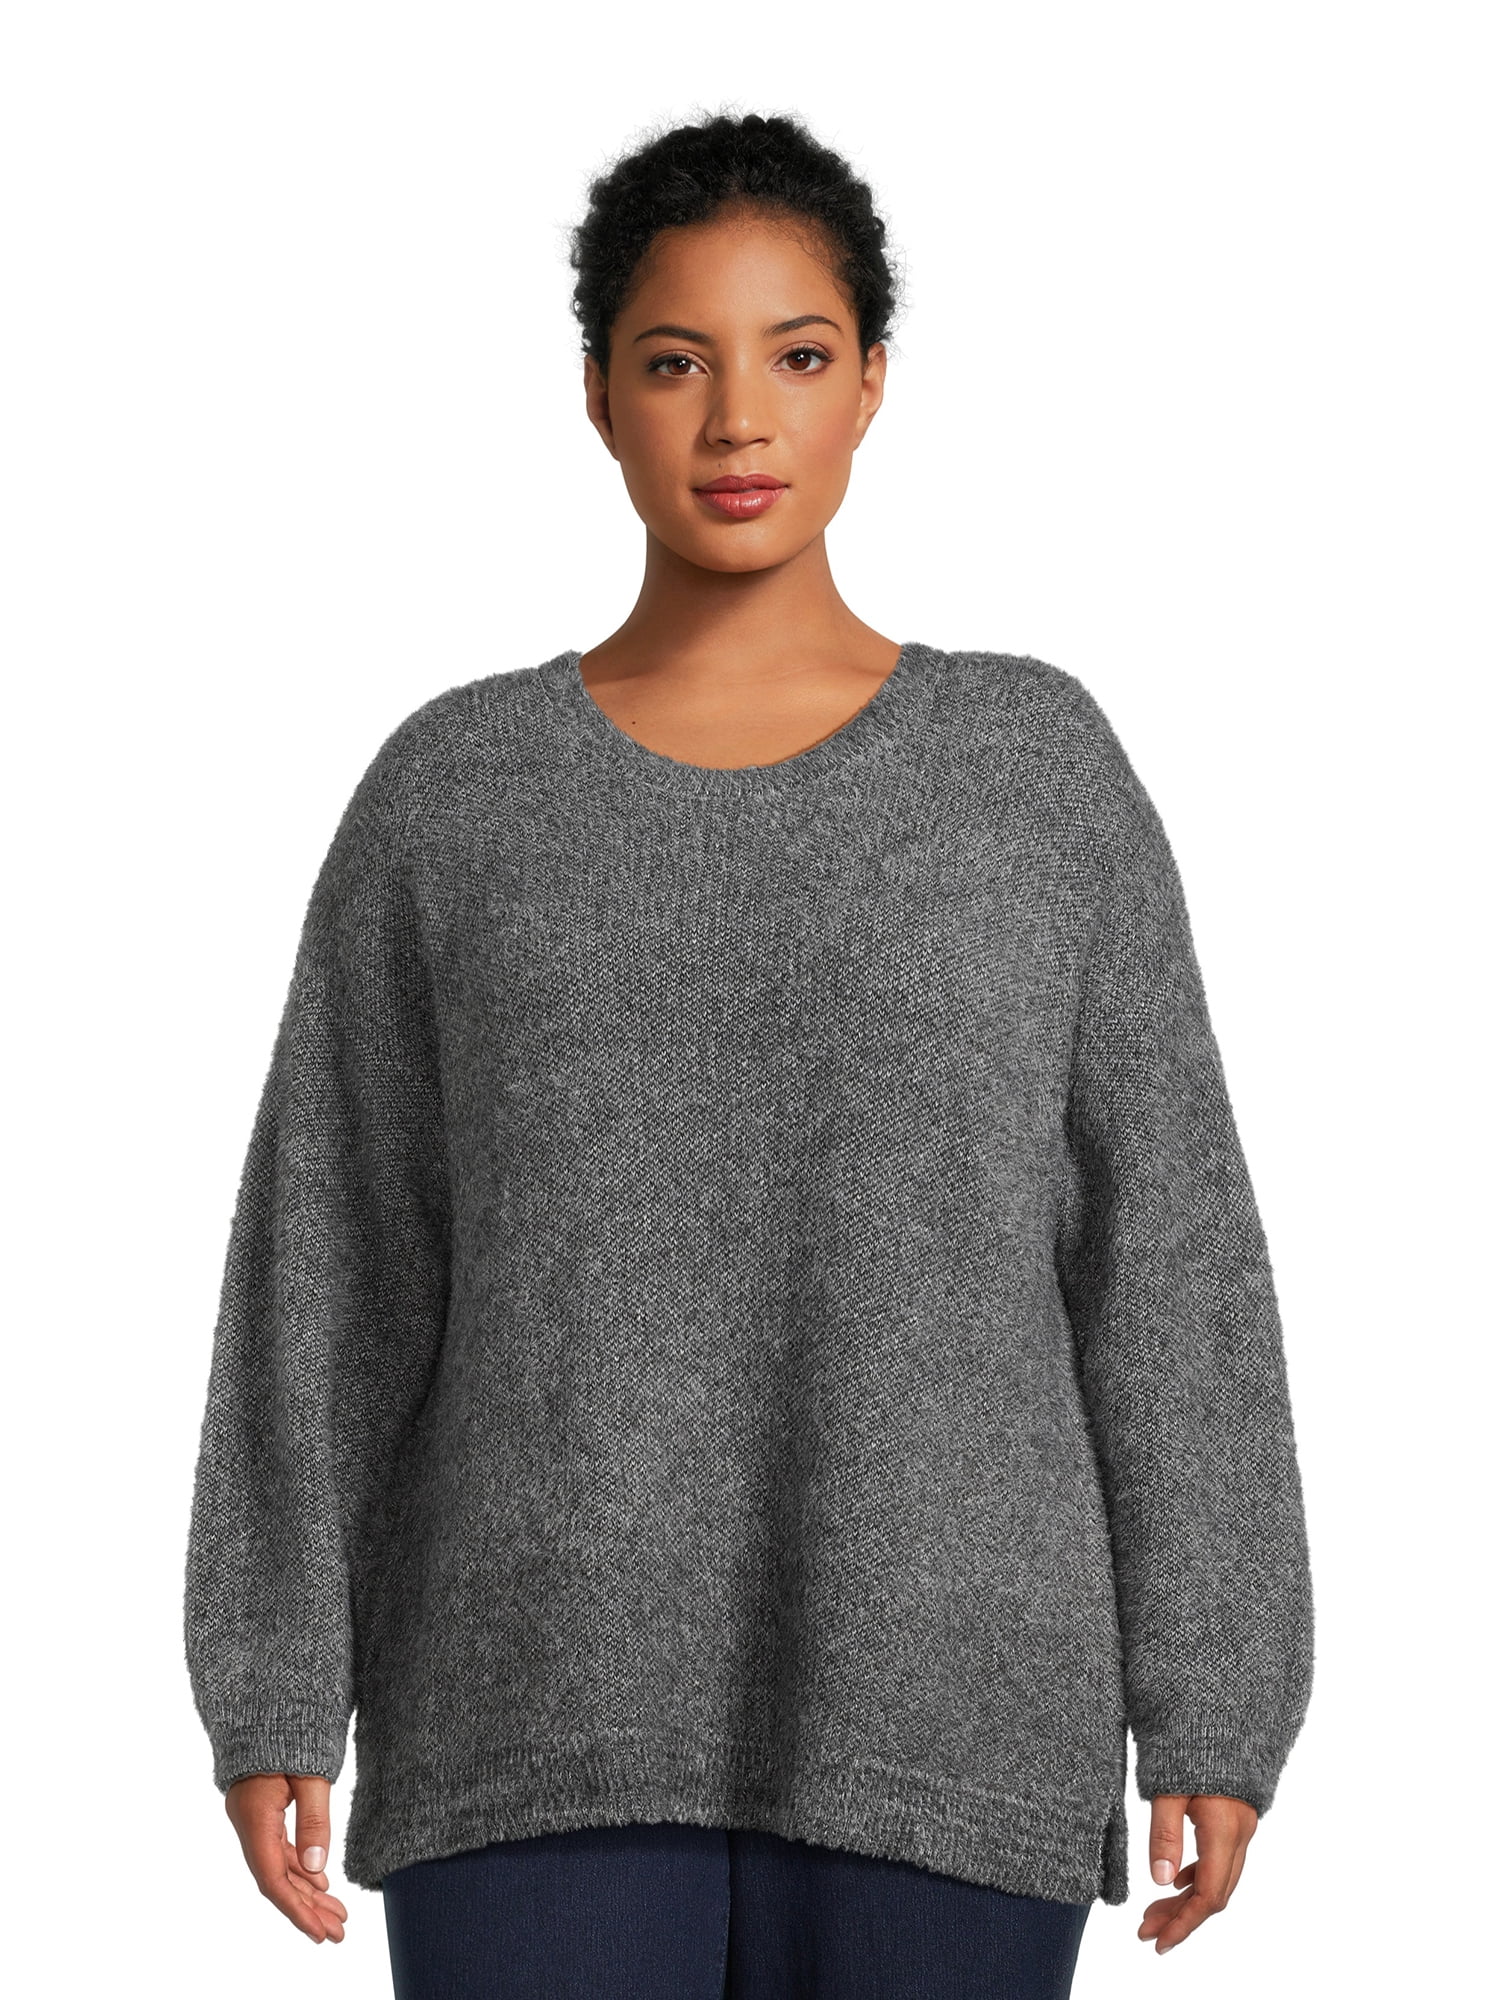 Terra And Sky Women S Plus Size Eyelash Knit Pullover Sweater Midweight